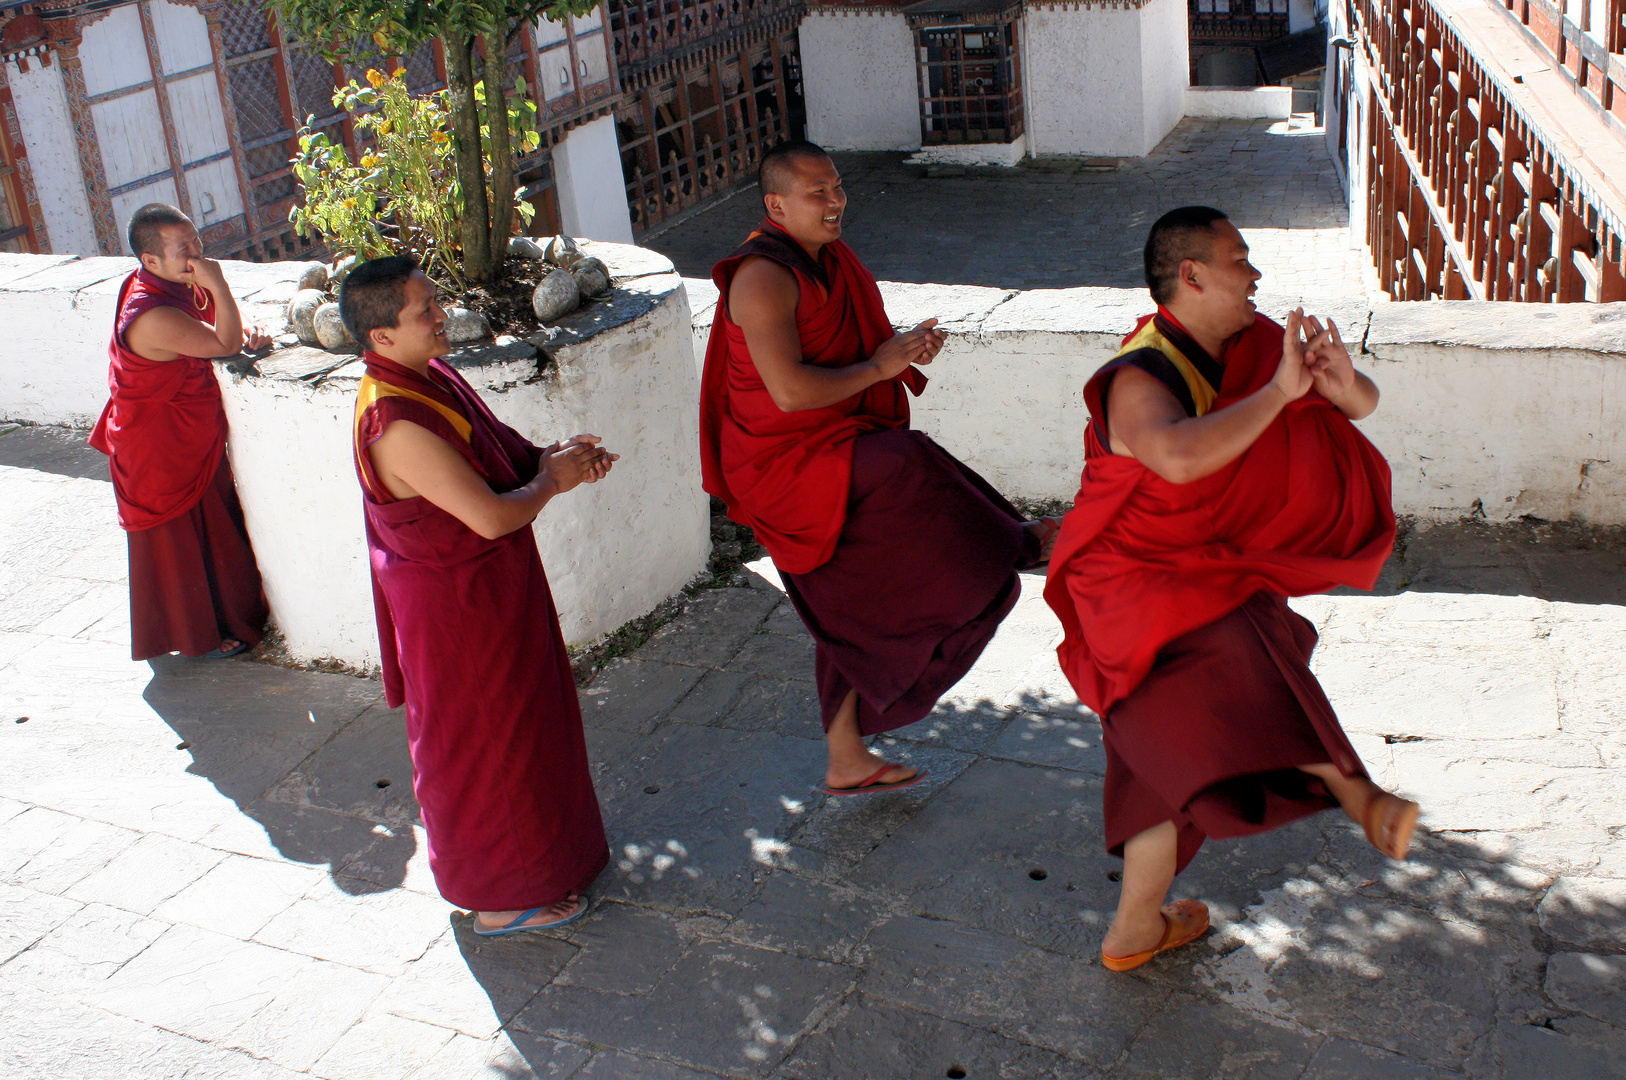 The dancing Monks